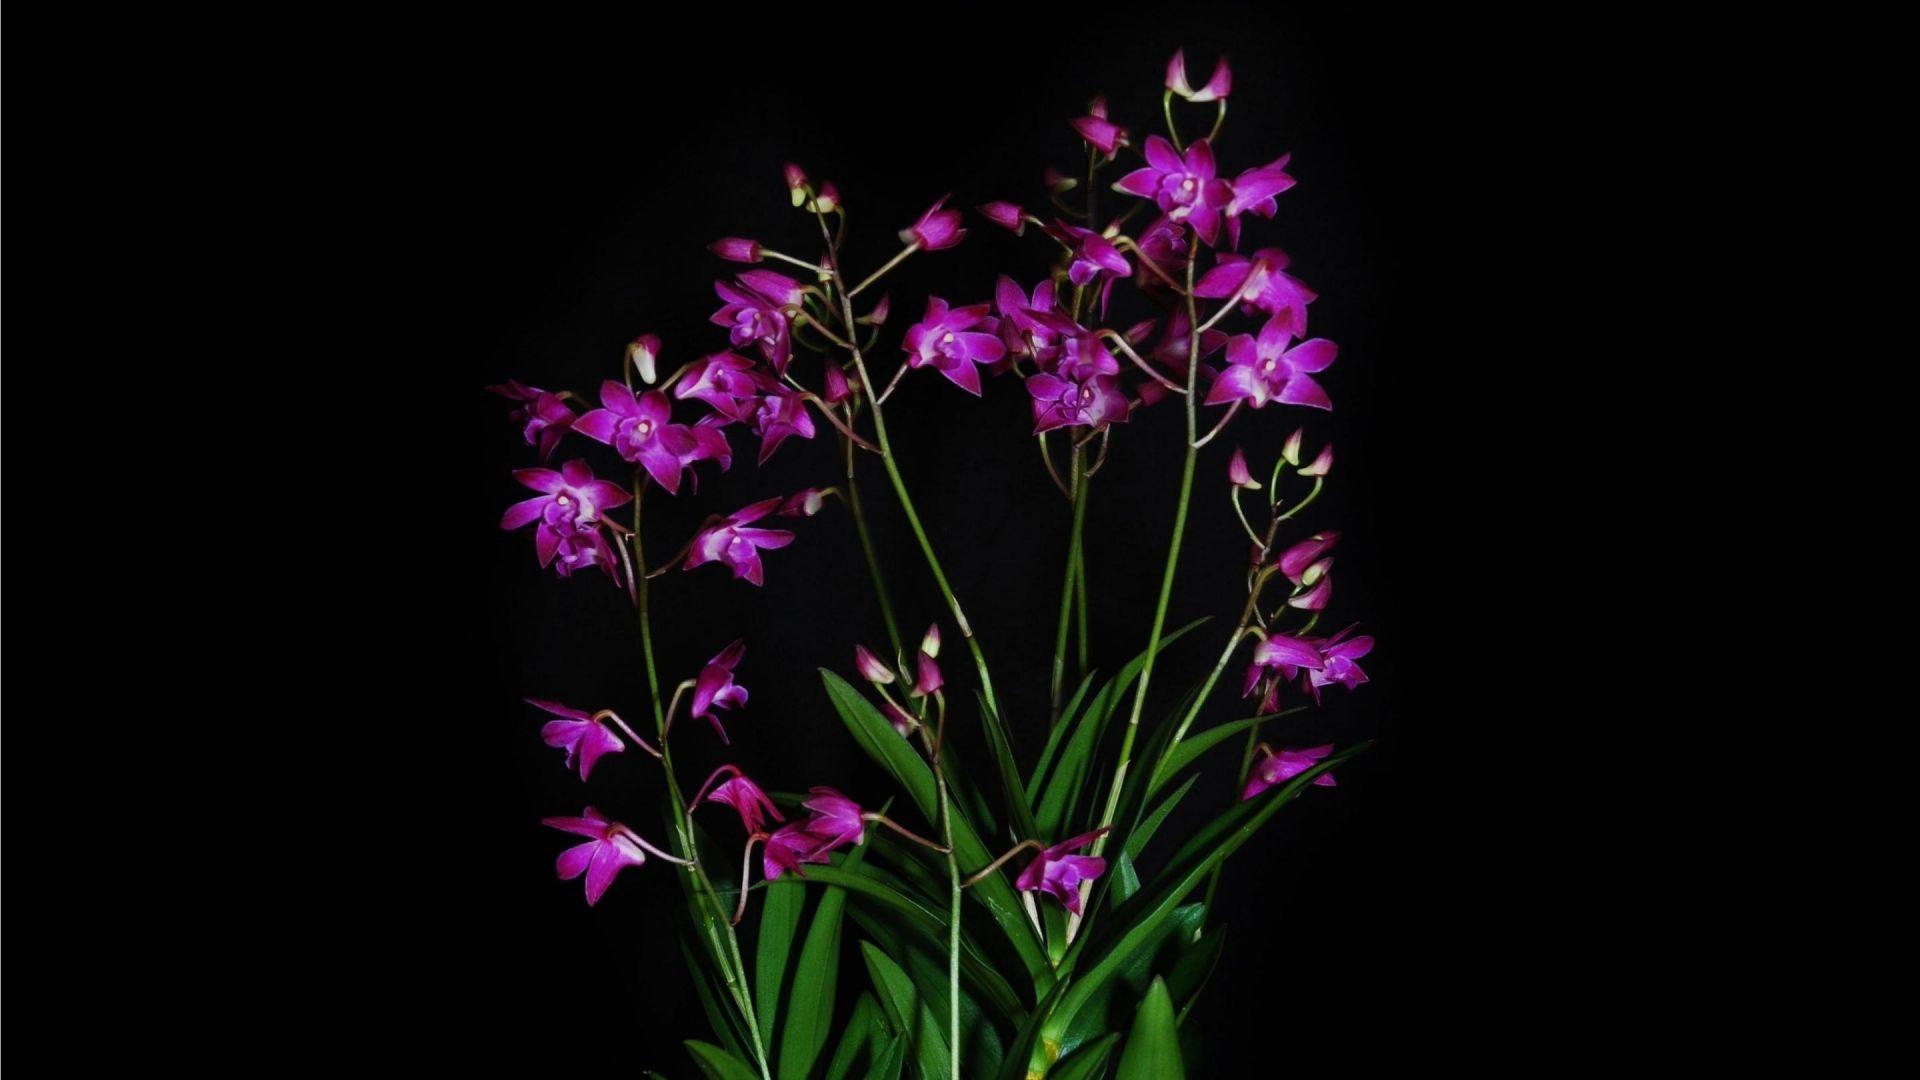 Download Wallpaper 1920x1080 Orchid, Exotic, Black background